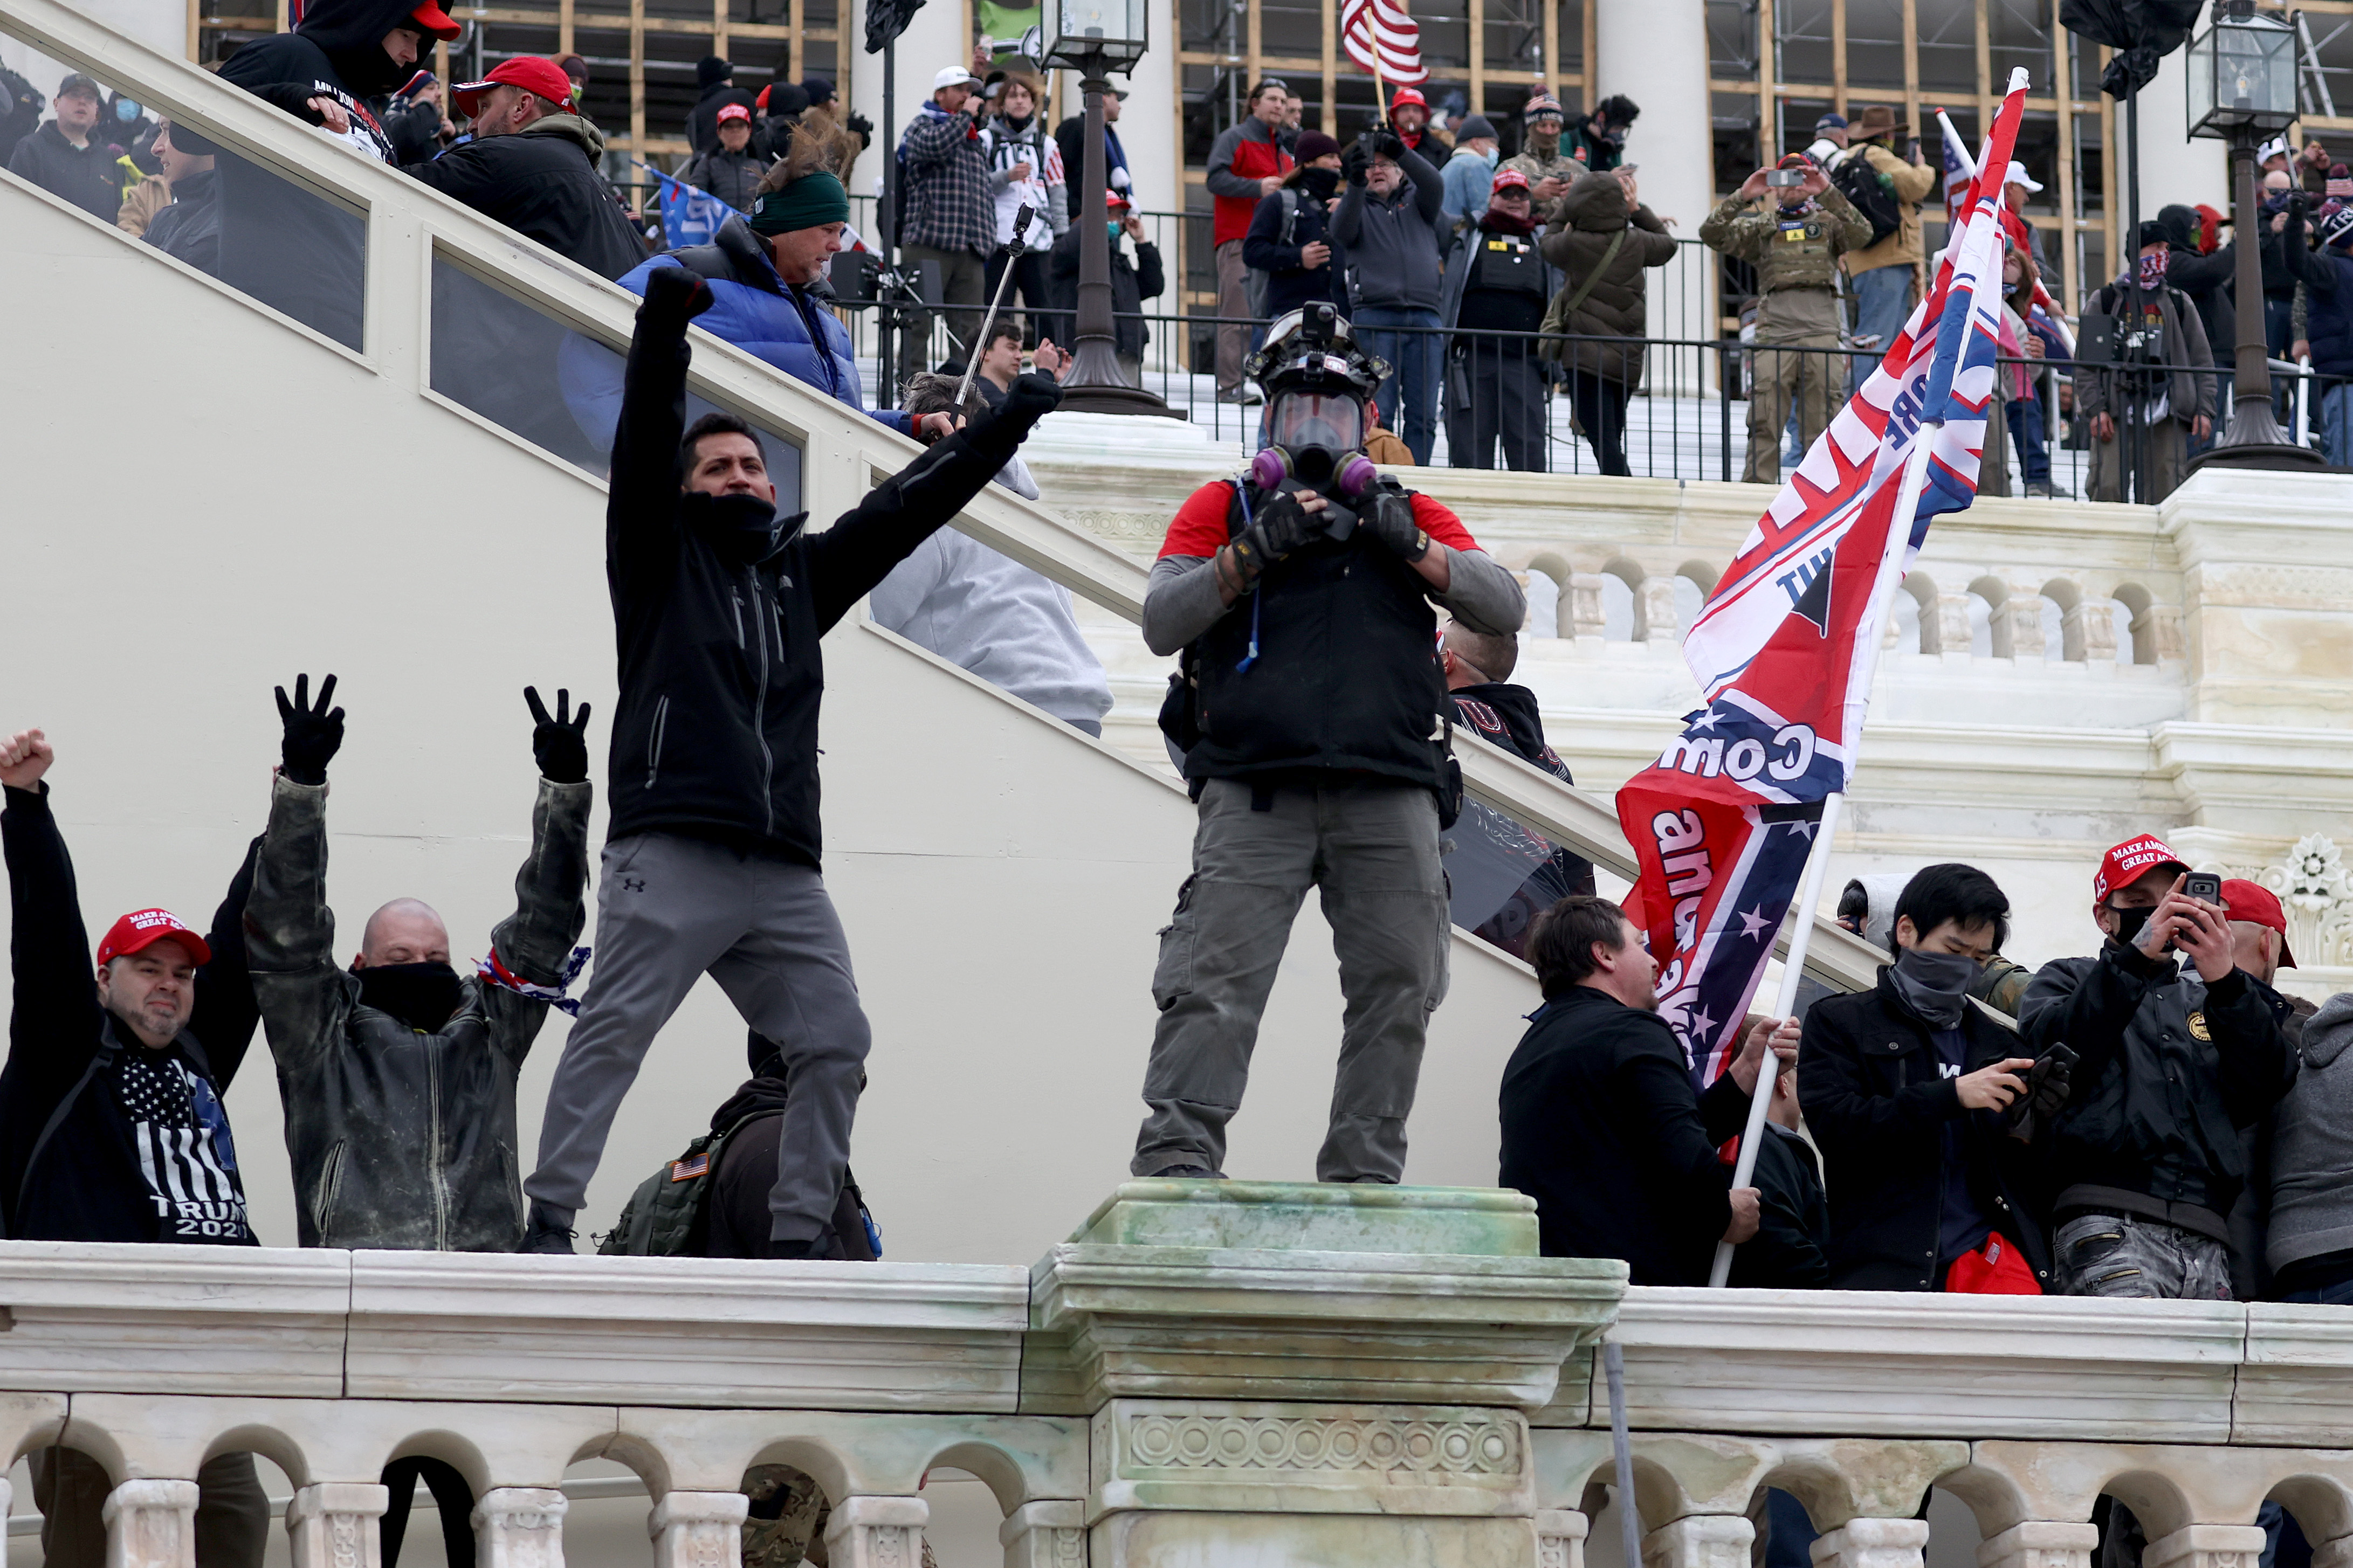 Rioters stand on the Capitol railings and stairs, holding up their arms and waving a flag.